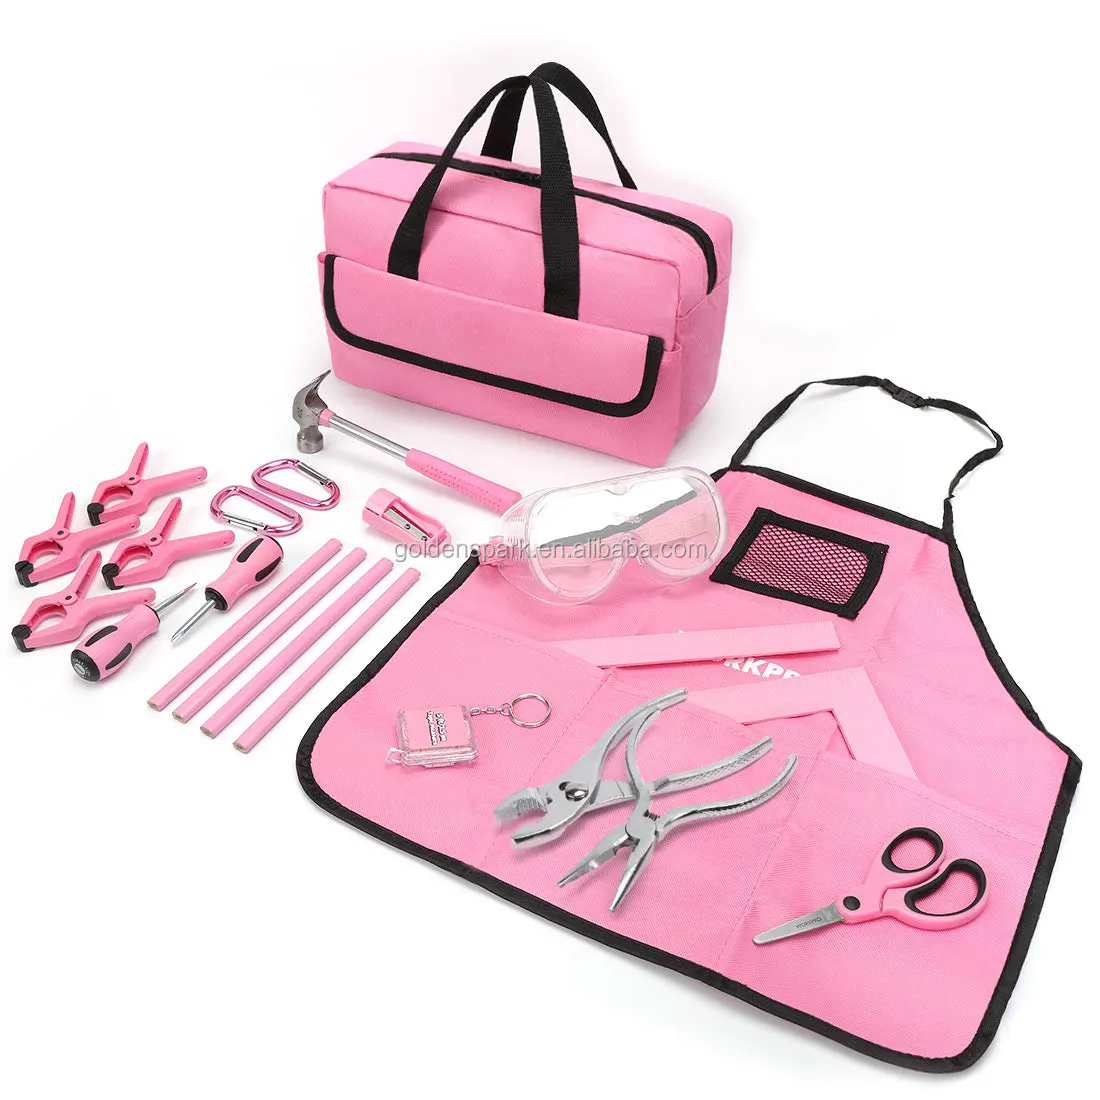 23-piece Girls Tool Kit with Real Hand Tools, Safety Goggles, Storage Bag|Home DIY & Woodworking - Pink